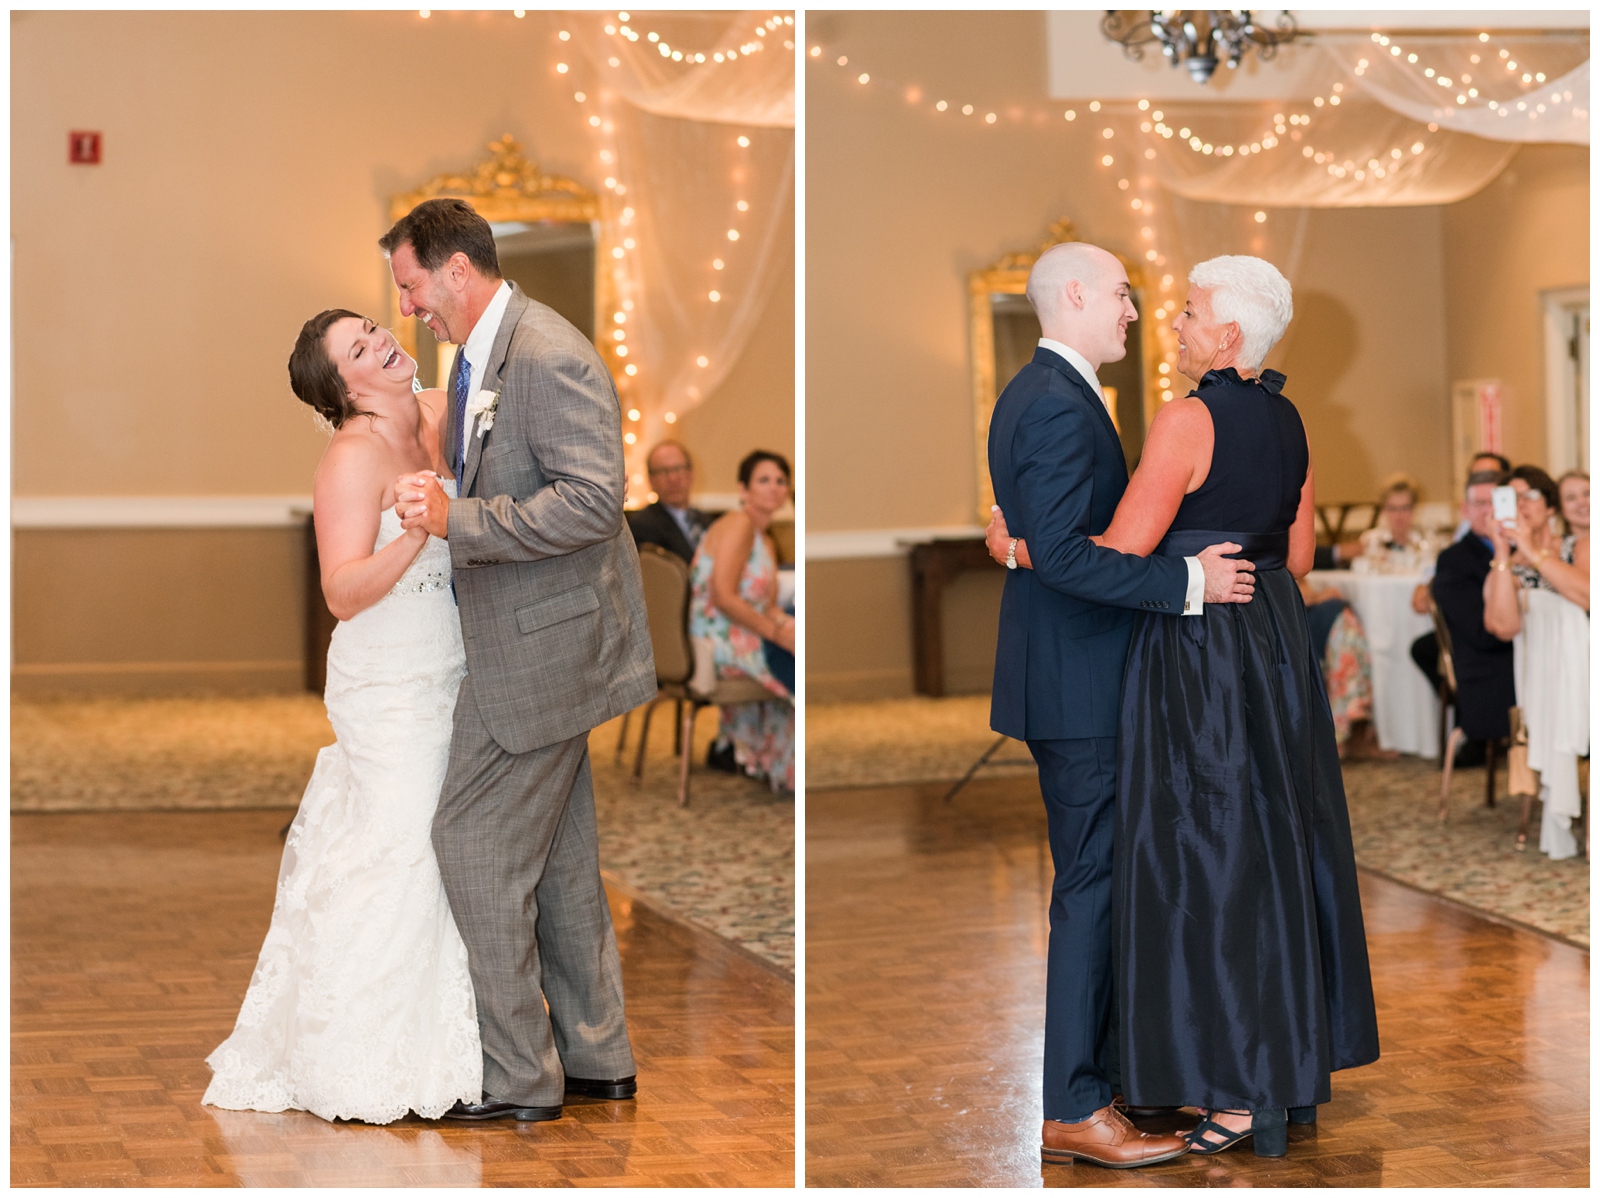 bride dances with father and groom dances with mother in navy gown during Ohio wedding reception